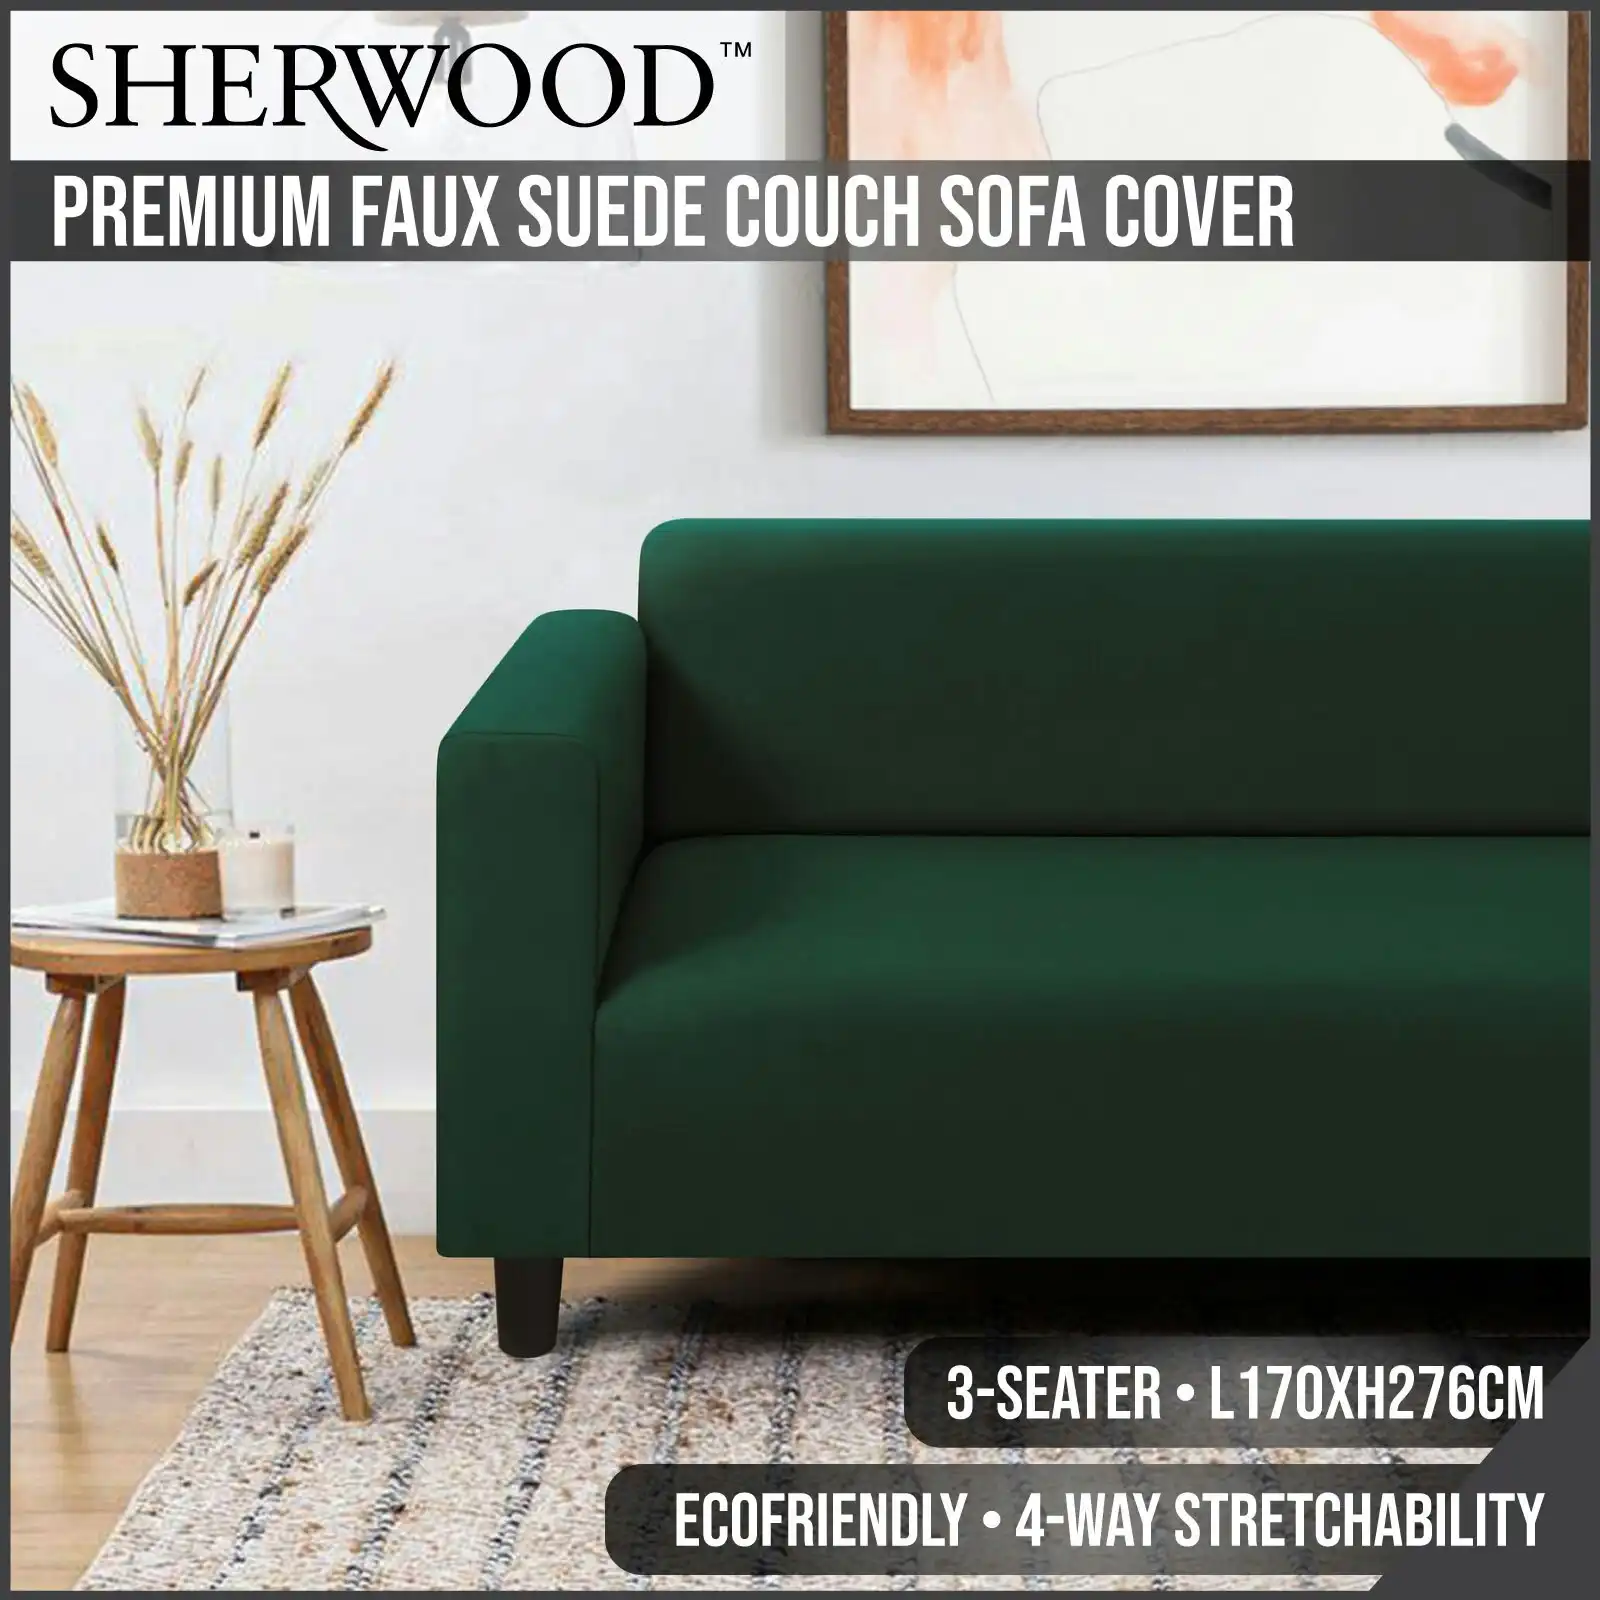 Sherwood Home Premium Faux Suede Eden Green 3 Seater Couch Sofa Cover